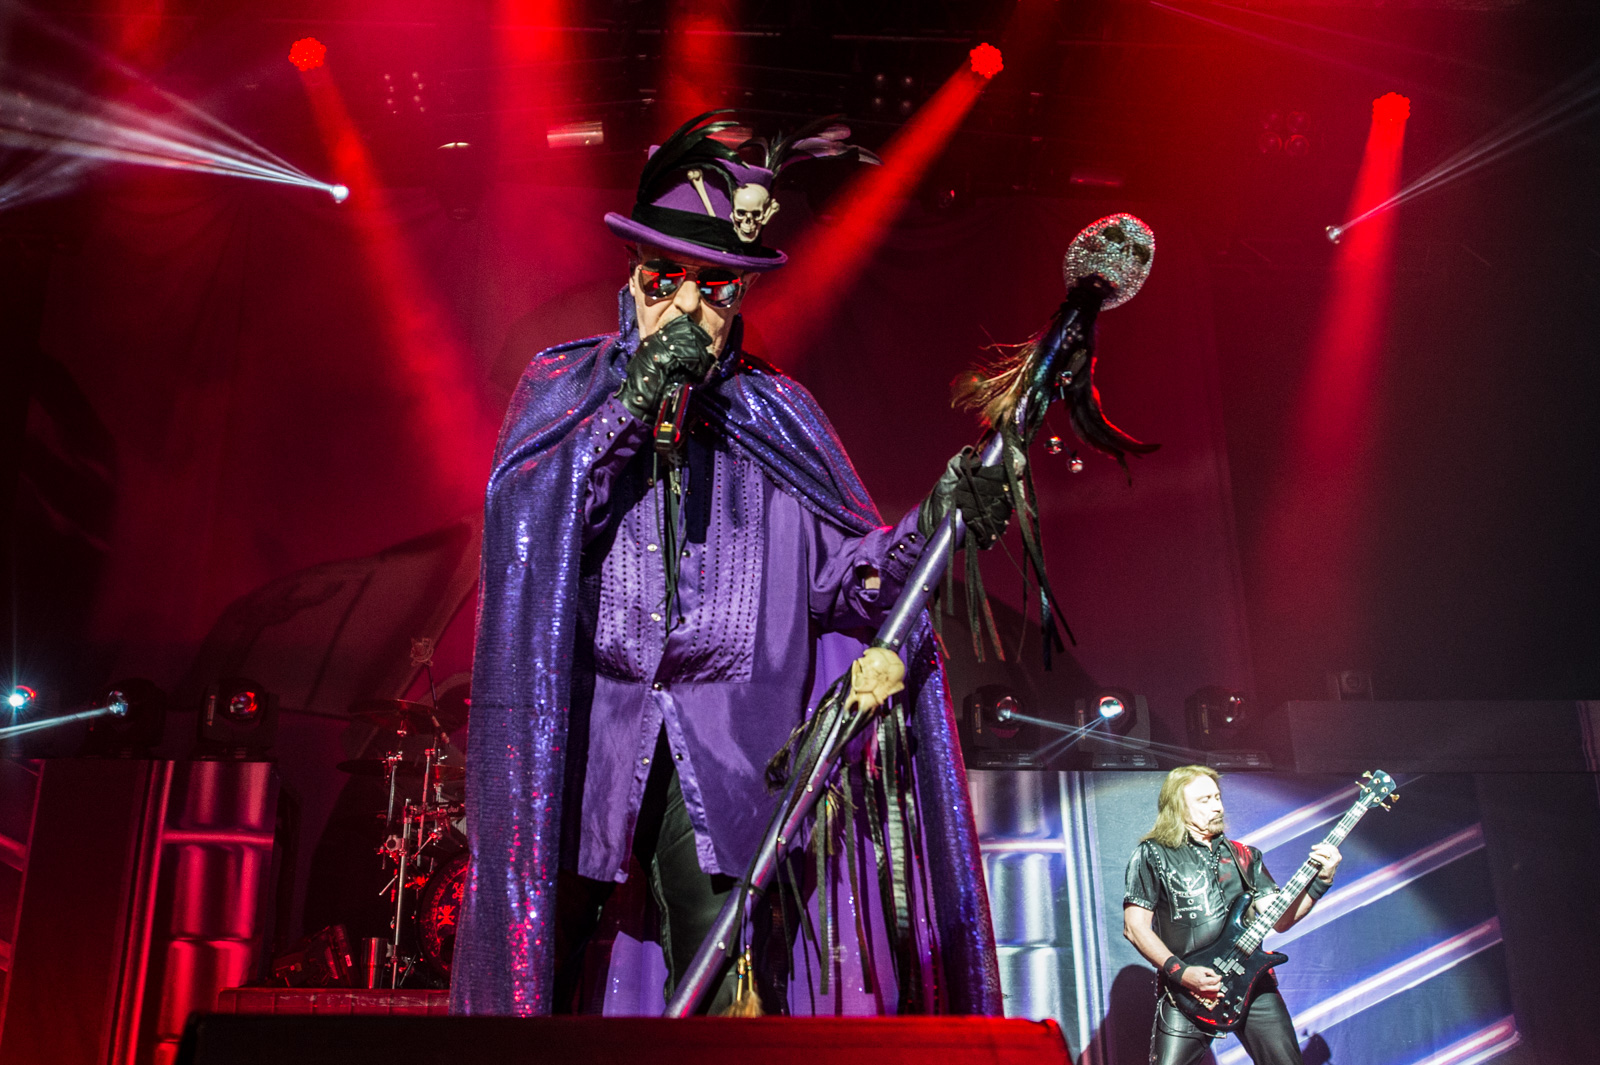 Judas Priest: See Epics Photos of Rob Halford and Co. in New York.